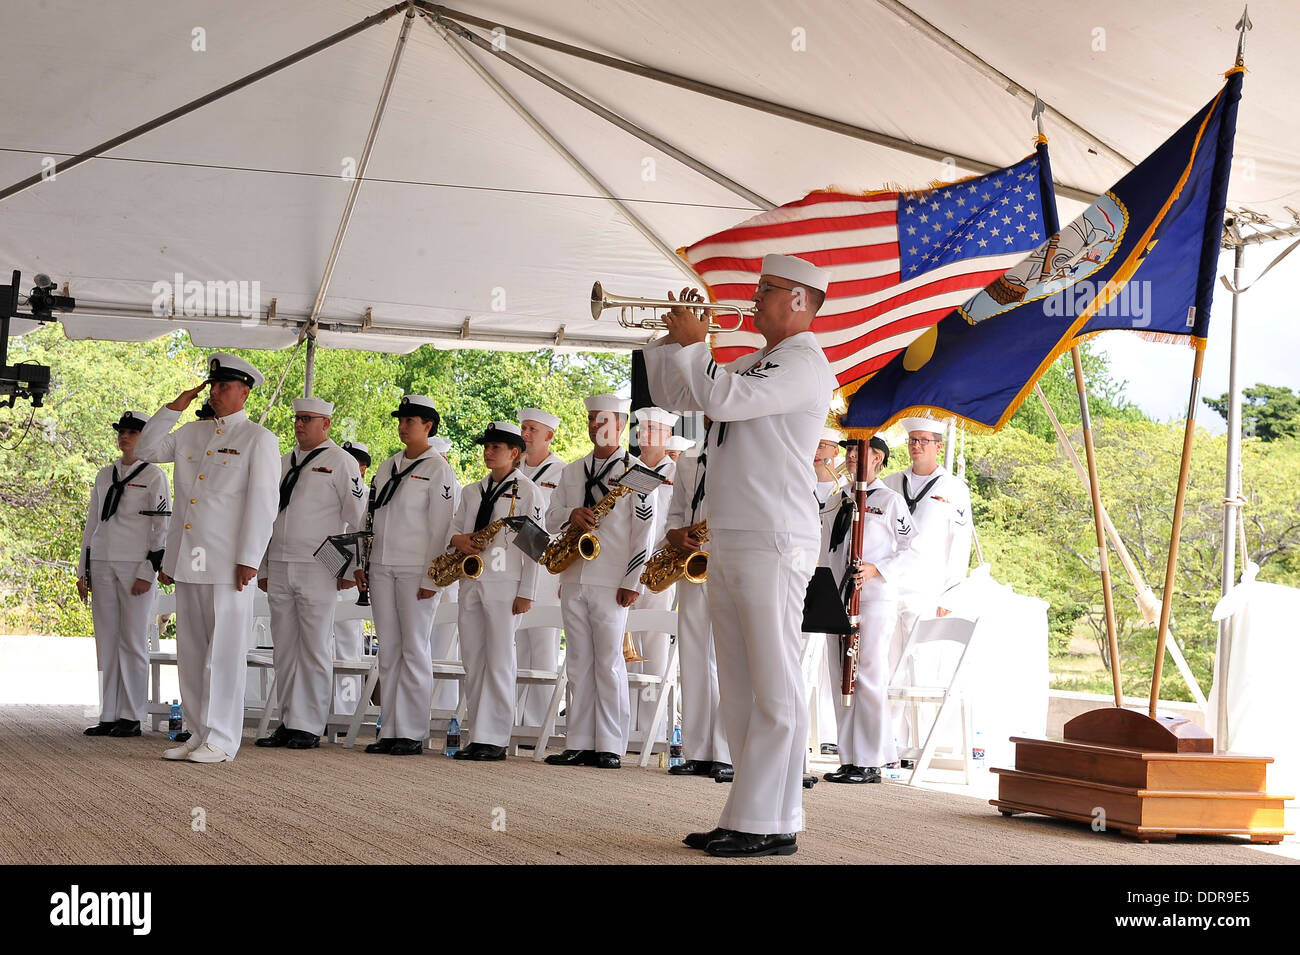 The U.S. Pacific Fleet band render honors with the playing of echo taps during the USS Missouri Memorial Association 68th anniversary celebration commemorating The End of World War II, Monday, Sept. 2, at the Battleship Missouri Memorial, Pearl Harbor, Hi Stock Photo